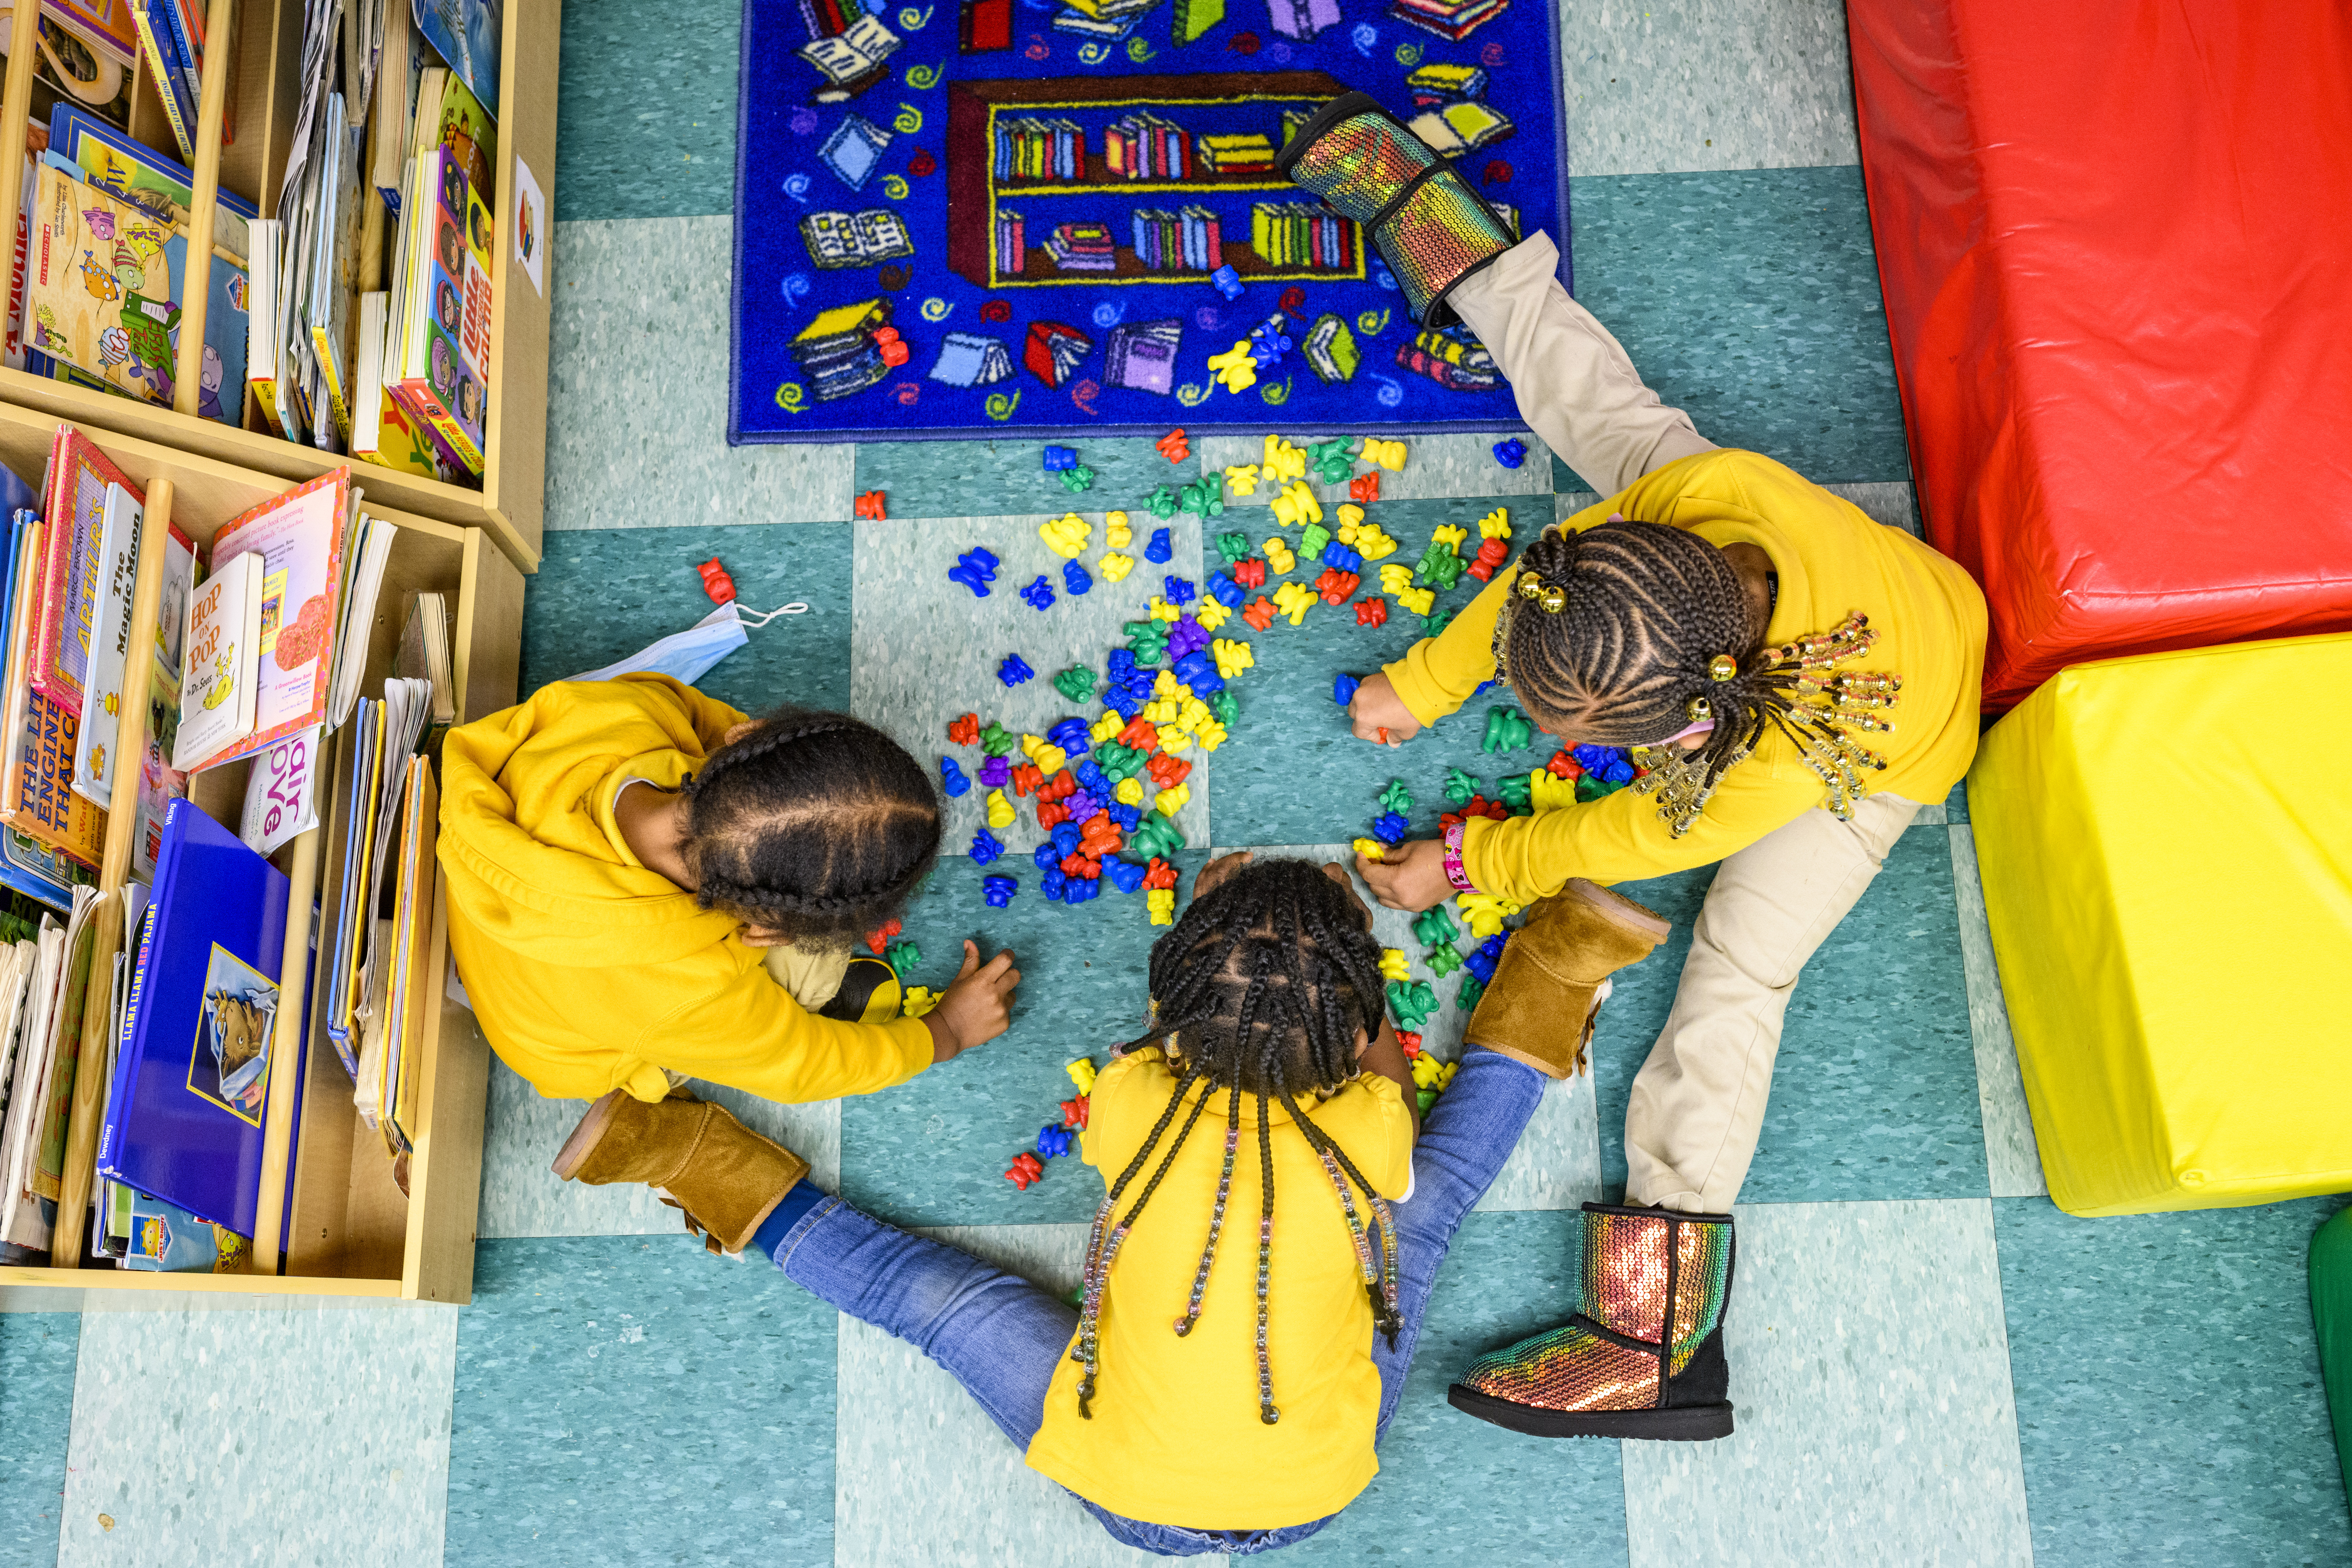 Seen from above, three children in yellow shirts play with brightly colored puzzle pieces on a tiled floor. 